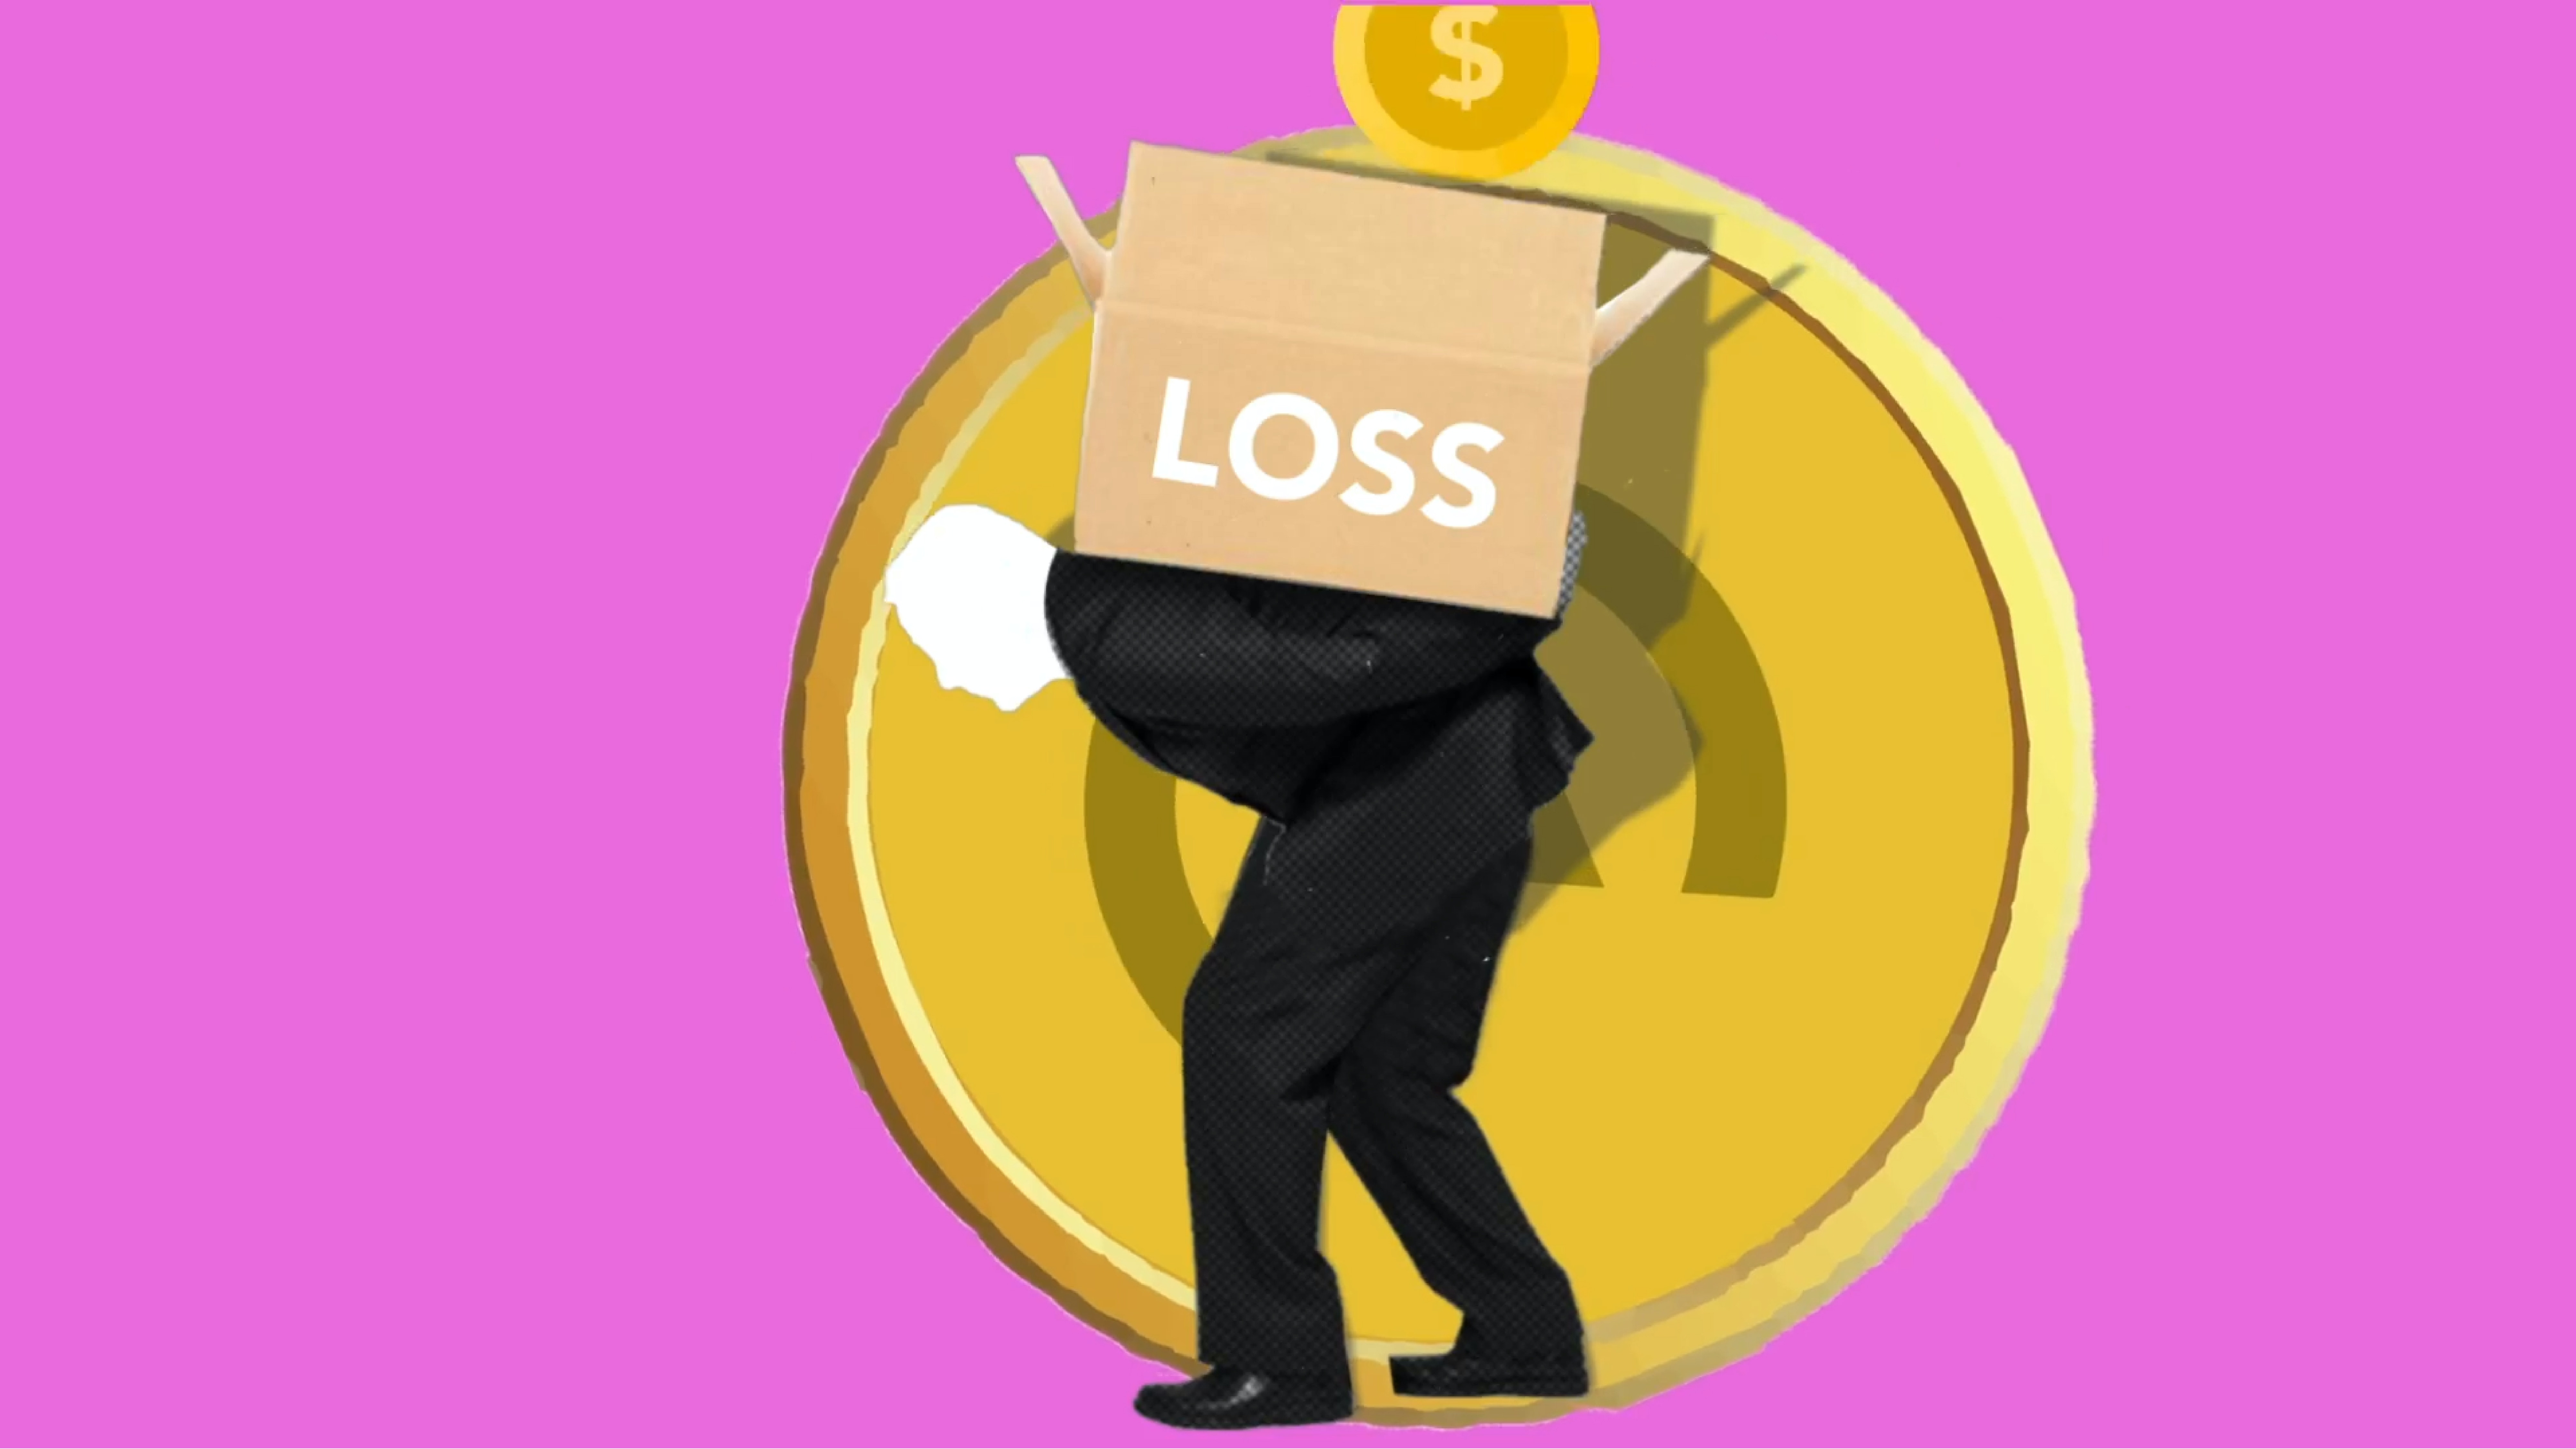 Illustration of a man stooped over at the waist, carrying a brown box labeled “LOSS” on his back.